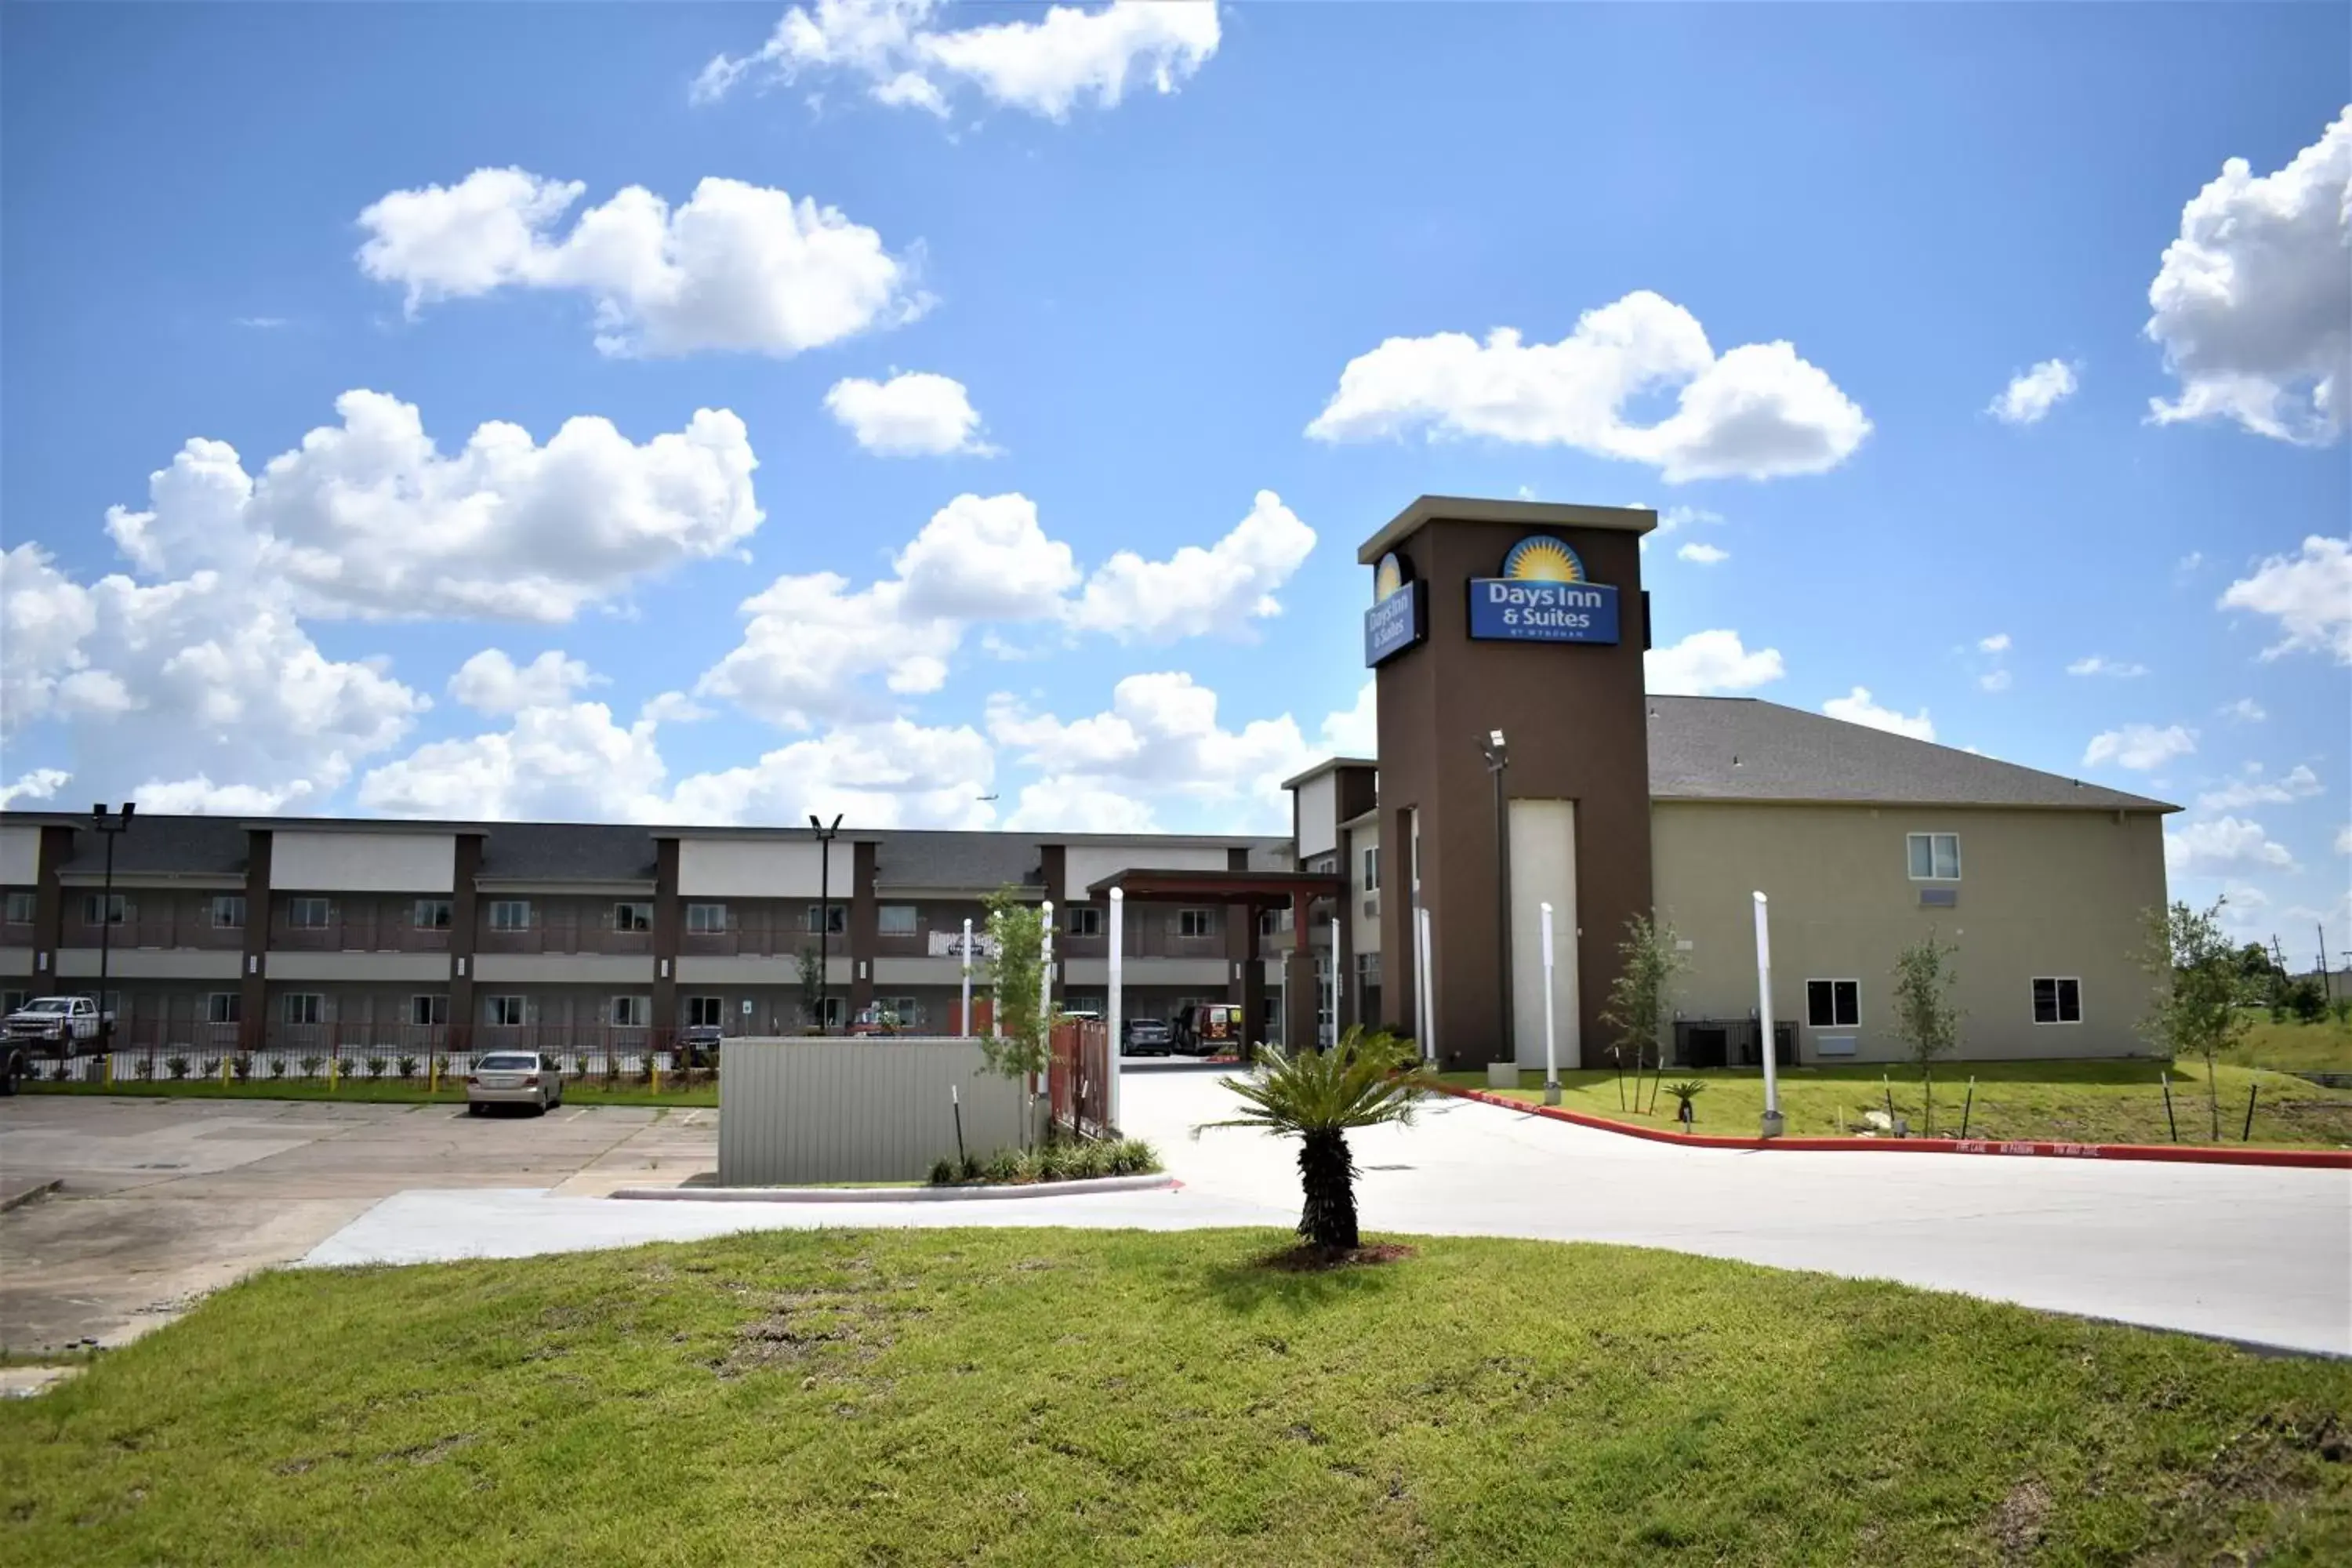 Property Building in Days Inn & Suites by Wyndham Downtown/University of Houston